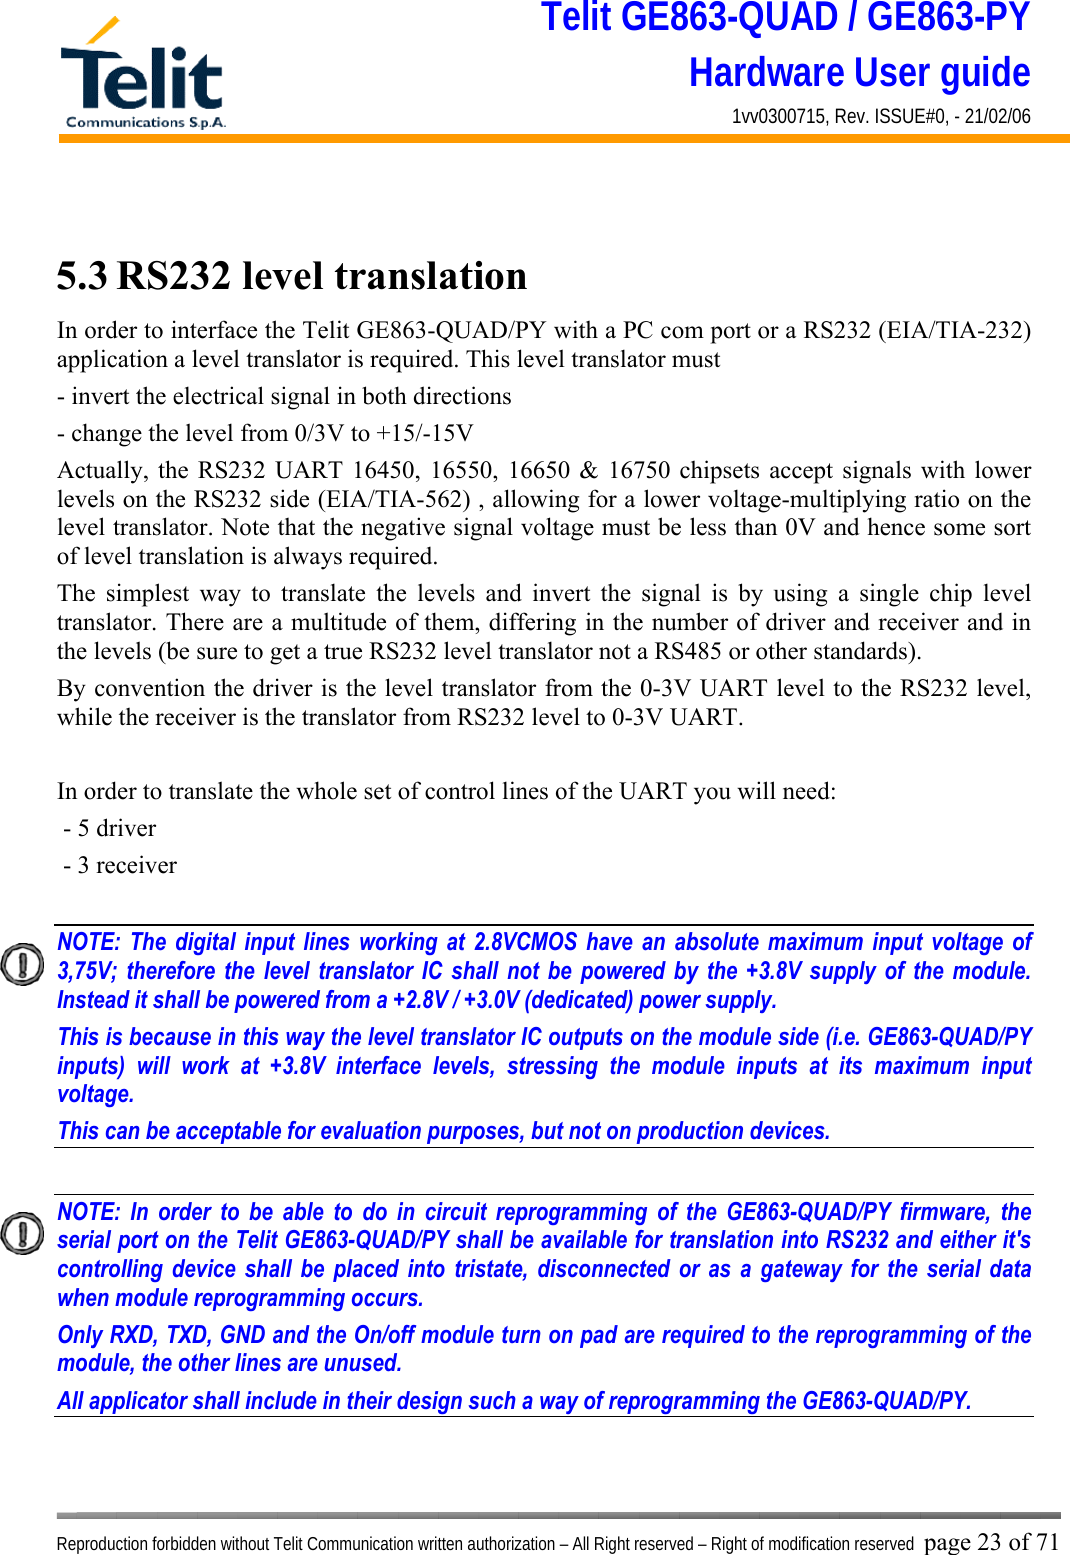 Telit GE863-QUAD / GE863-PY Hardware User guide 1vv0300715, Rev. ISSUE#0, - 21/02/06    Reproduction forbidden without Telit Communication written authorization – All Right reserved – Right of modification reserved page 23 of 71  5.3 RS232 level translation In order to interface the Telit GE863-QUAD/PY with a PC com port or a RS232 (EIA/TIA-232) application a level translator is required. This level translator must - invert the electrical signal in both directions - change the level from 0/3V to +15/-15V  Actually, the RS232 UART 16450, 16550, 16650 &amp; 16750 chipsets accept signals with lower levels on the RS232 side (EIA/TIA-562) , allowing for a lower voltage-multiplying ratio on the level translator. Note that the negative signal voltage must be less than 0V and hence some sort of level translation is always required.  The simplest way to translate the levels and invert the signal is by using a single chip level translator. There are a multitude of them, differing in the number of driver and receiver and in the levels (be sure to get a true RS232 level translator not a RS485 or other standards). By convention the driver is the level translator from the 0-3V UART level to the RS232 level, while the receiver is the translator from RS232 level to 0-3V UART.  In order to translate the whole set of control lines of the UART you will need:  - 5 driver - 3 receiver  NOTE: The digital input lines working at 2.8VCMOS have an absolute maximum input voltage of 3,75V; therefore the level translator IC shall not be powered by the +3.8V supply of the module. Instead it shall be powered from a +2.8V / +3.0V (dedicated) power supply. This is because in this way the level translator IC outputs on the module side (i.e. GE863-QUAD/PY inputs) will work at +3.8V interface levels, stressing the module inputs at its maximum input voltage. This can be acceptable for evaluation purposes, but not on production devices.  NOTE: In order to be able to do in circuit reprogramming of the GE863-QUAD/PY firmware, the serial port on the Telit GE863-QUAD/PY shall be available for translation into RS232 and either it&apos;s controlling device shall be placed into tristate, disconnected or as a gateway for the serial data when module reprogramming occurs. Only RXD, TXD, GND and the On/off module turn on pad are required to the reprogramming of the module, the other lines are unused. All applicator shall include in their design such a way of reprogramming the GE863-QUAD/PY.   